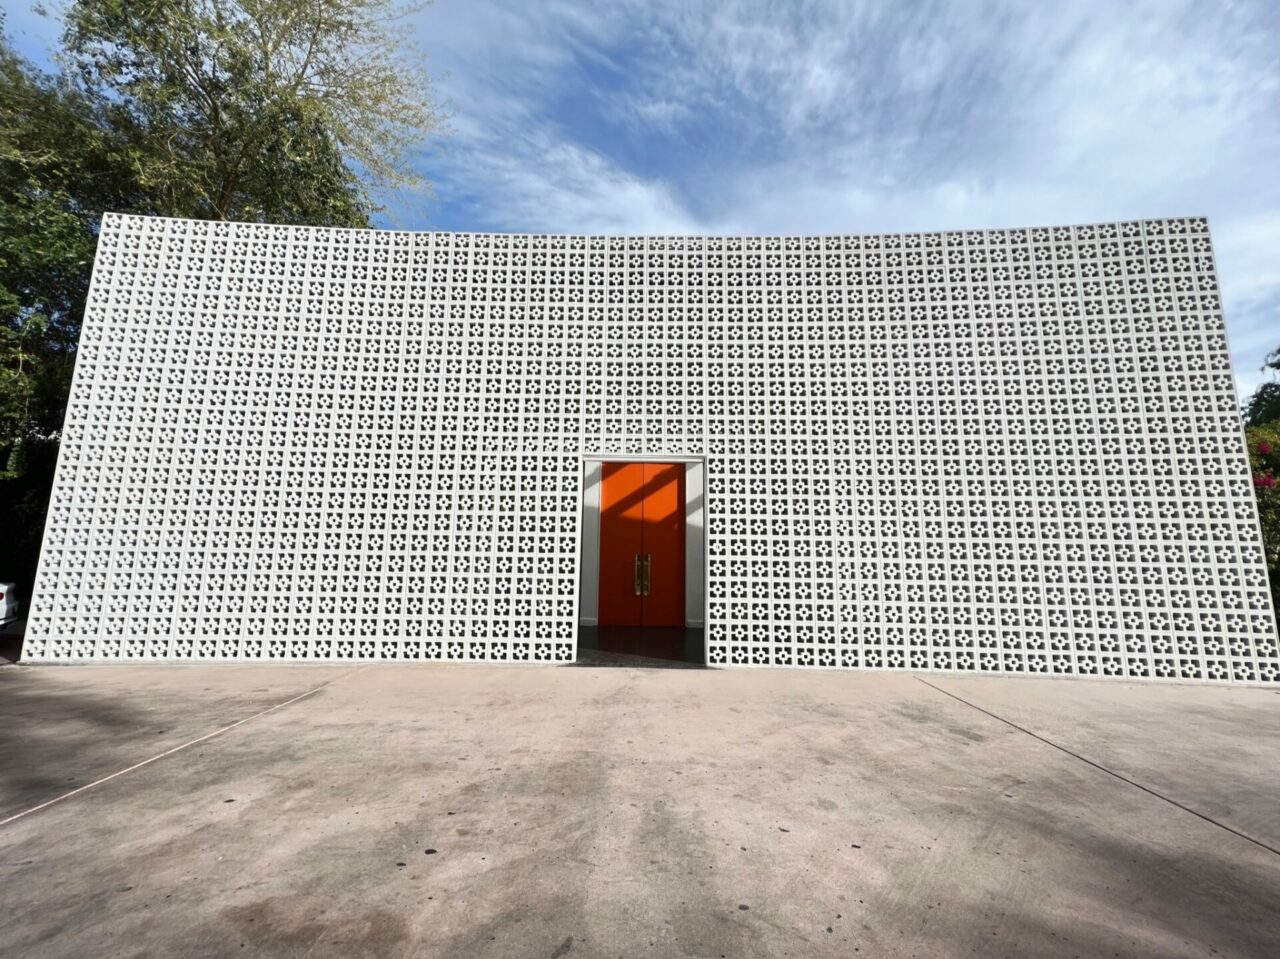 The entrance to The Parker Palm Springs - orange door with concrete 60's brick